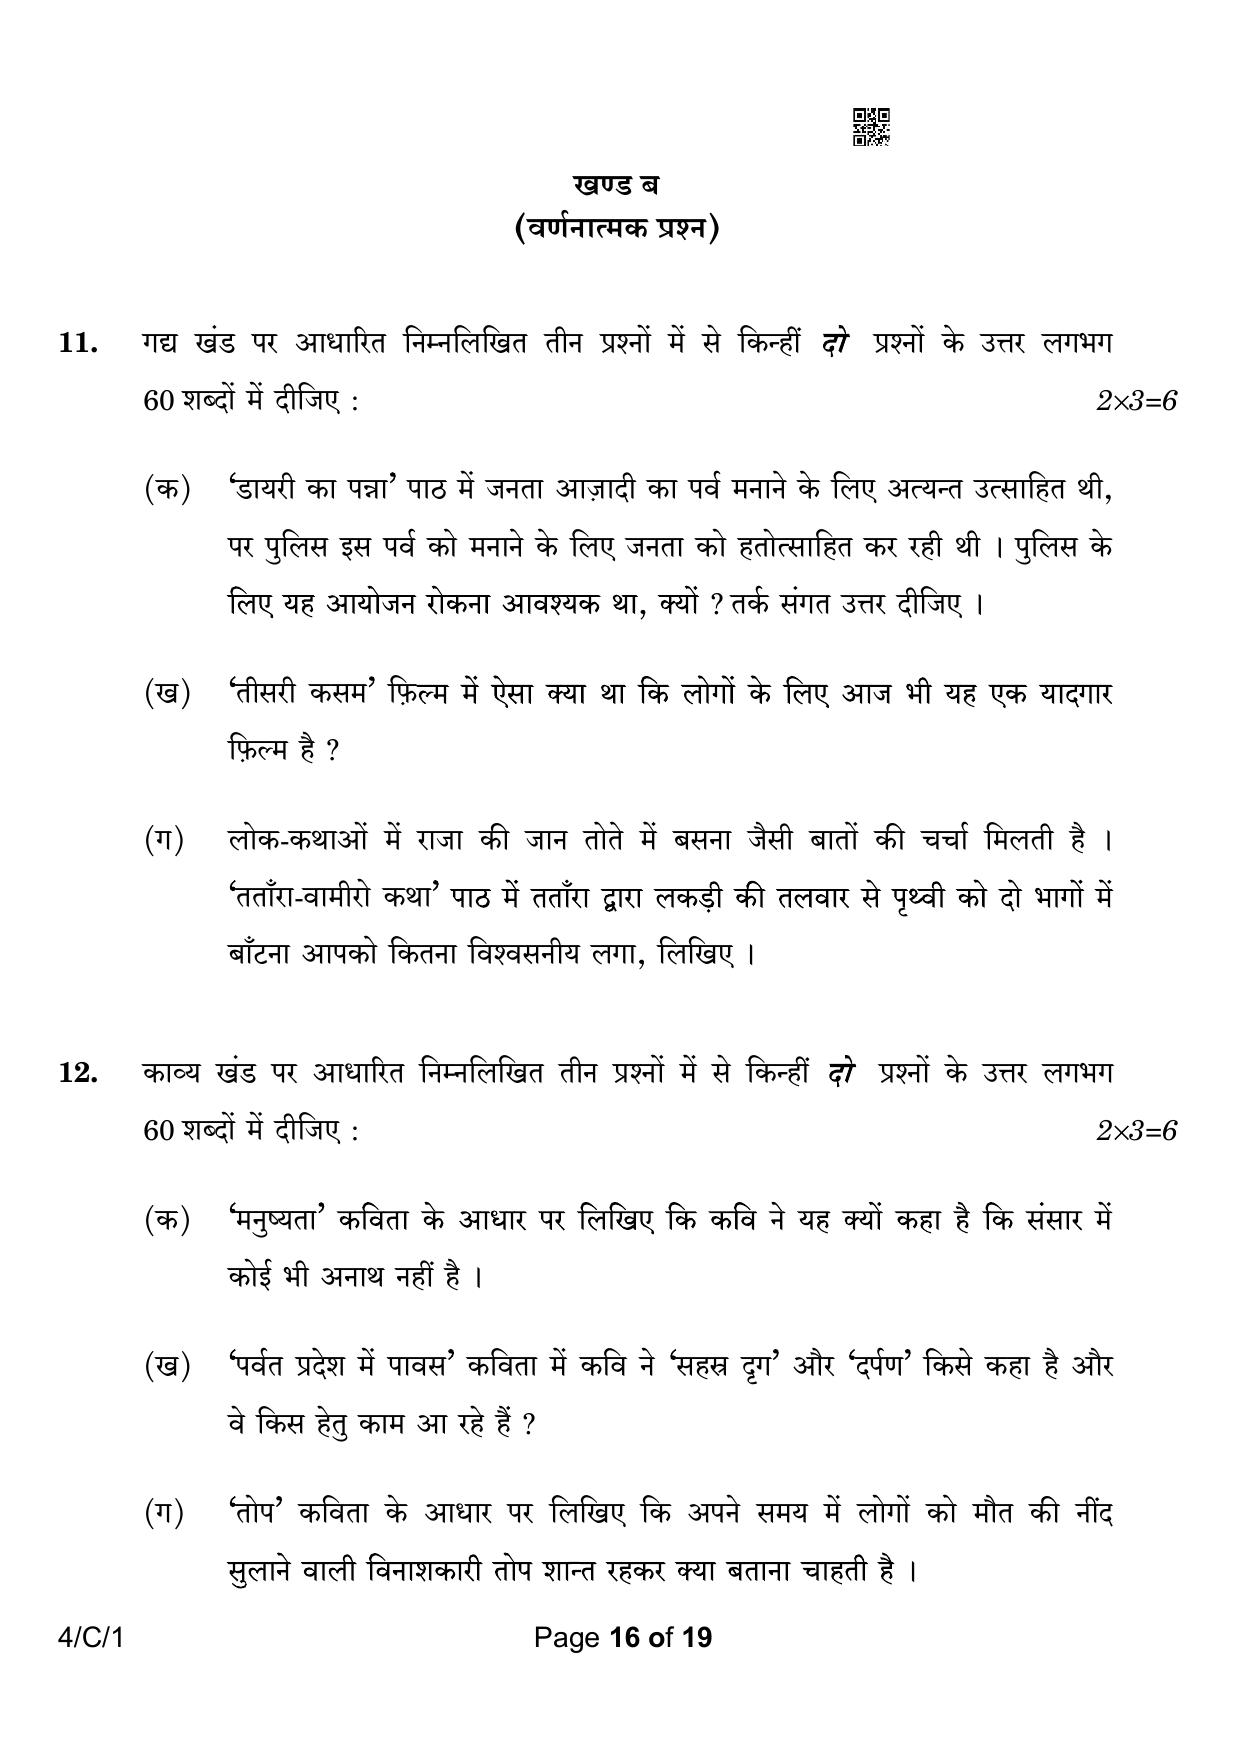 CBSE Class 10 4-1 Hindi B 2023 (Compartment) Question Paper - Page 16